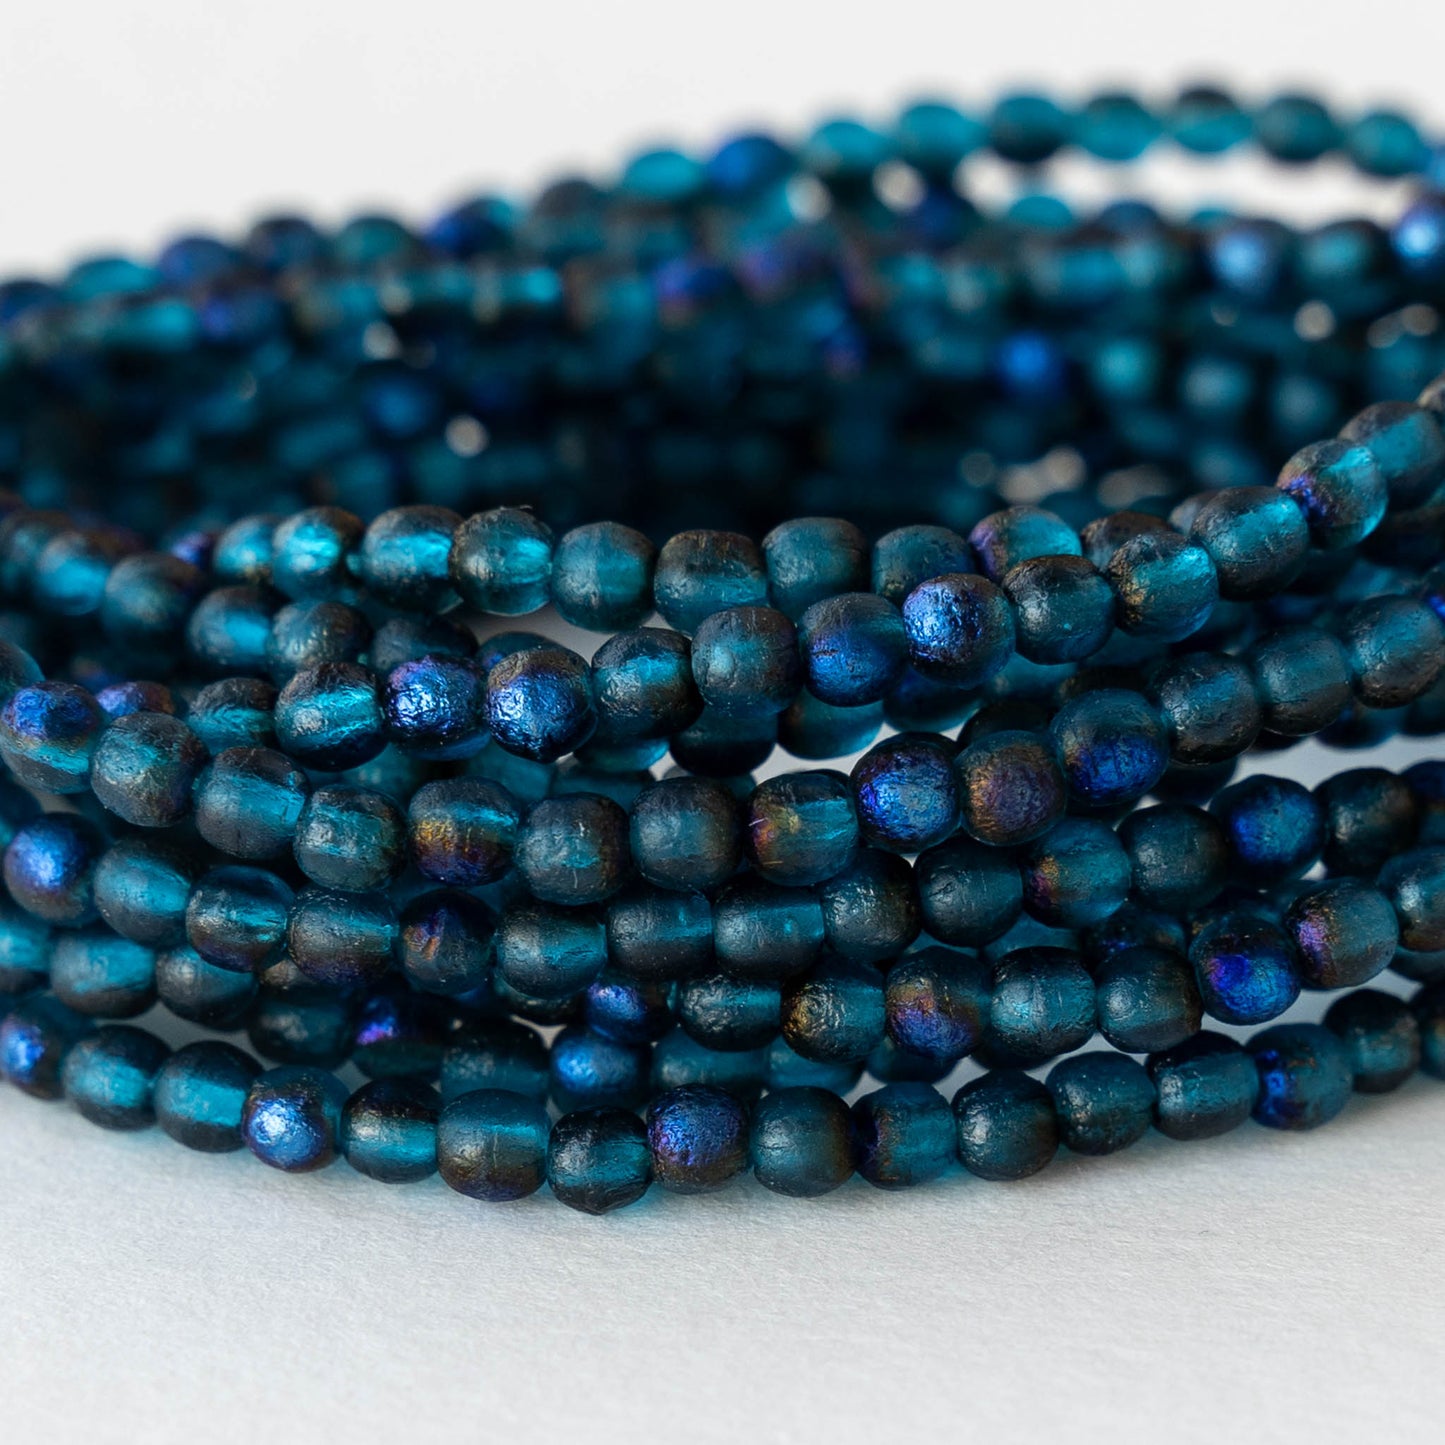 3mm Round Glass Beads - Etched Teal Blue Metallic - 50 Beads